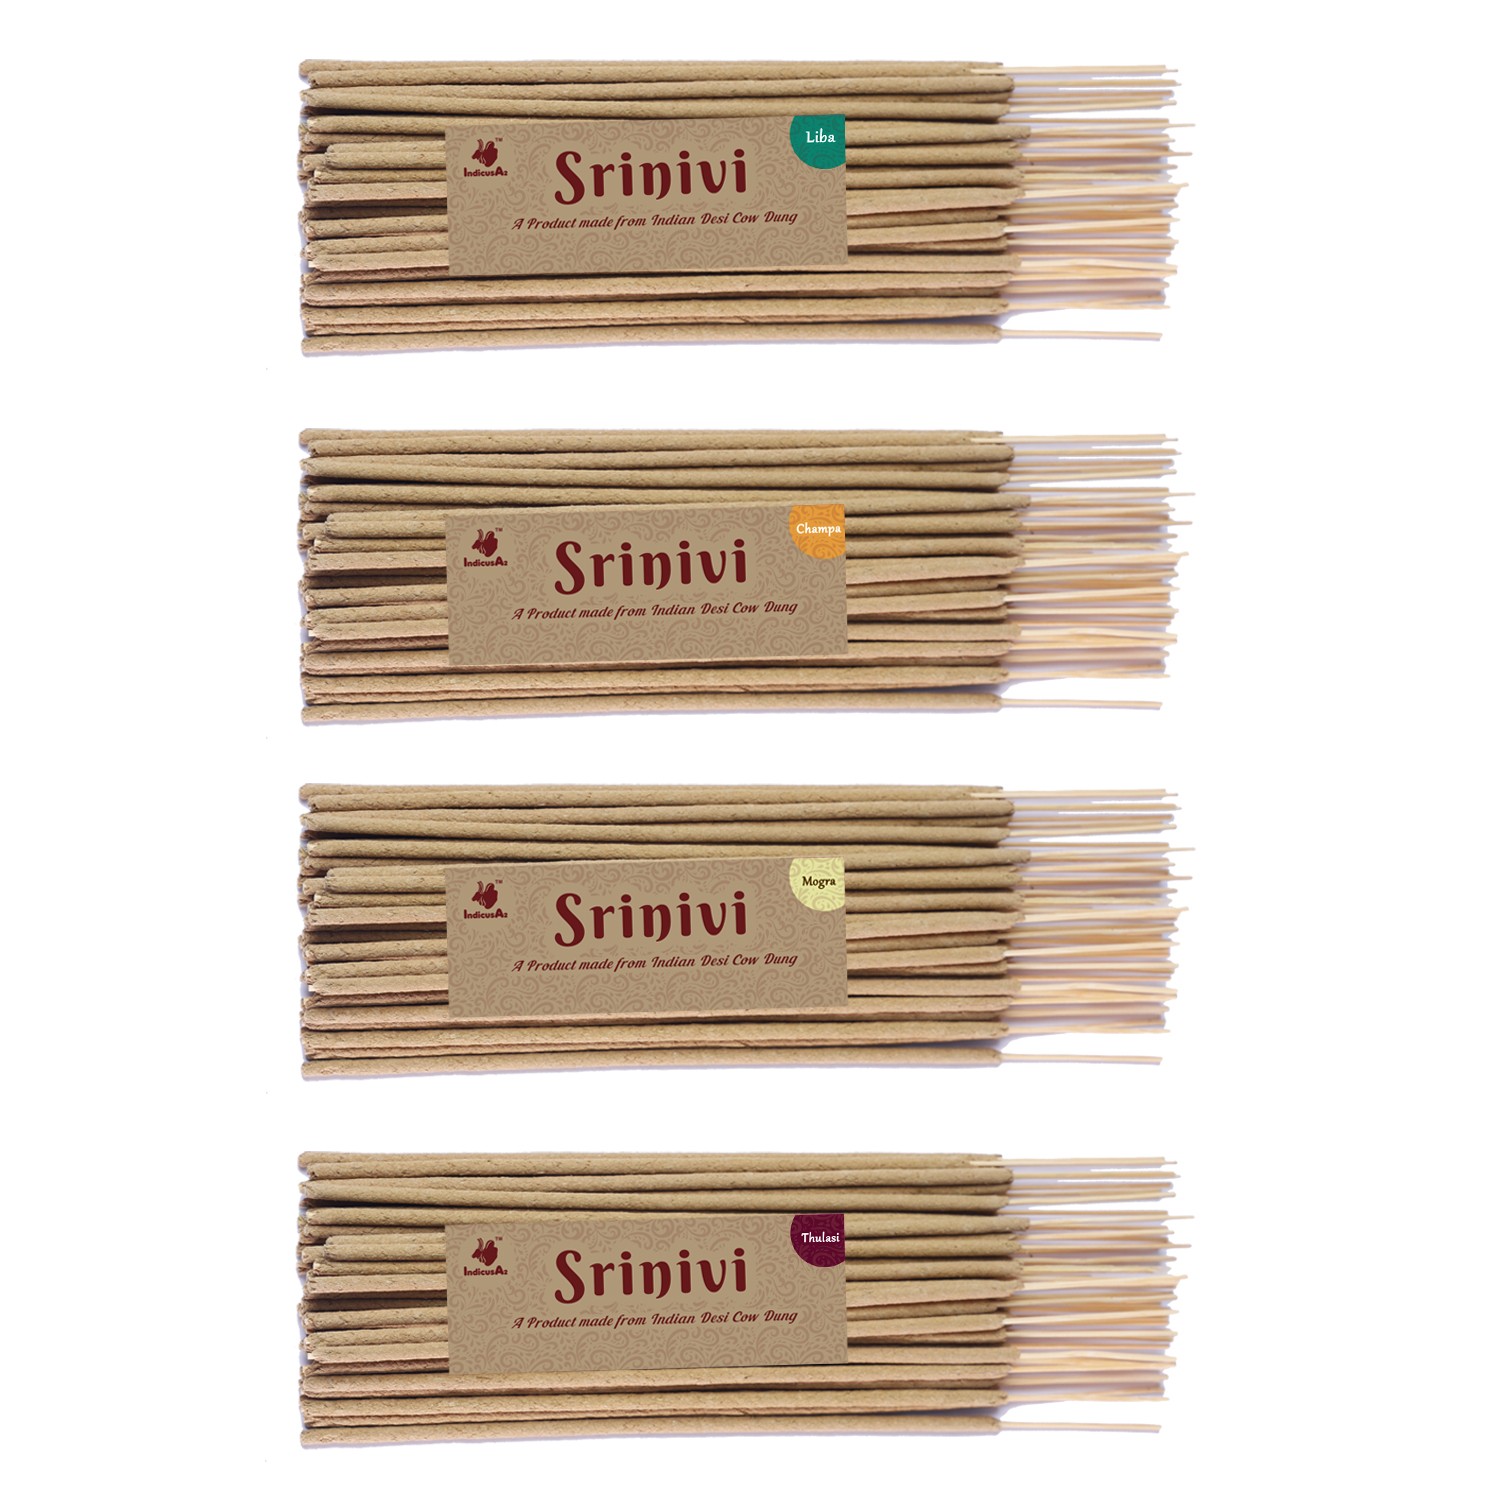 Srinivi Agarbattis - Made up of desi cow dung|Pack of 4|Each pack consists of 35 sticks|Fragrance – Liba, Champa, Mogra, Thulasi.